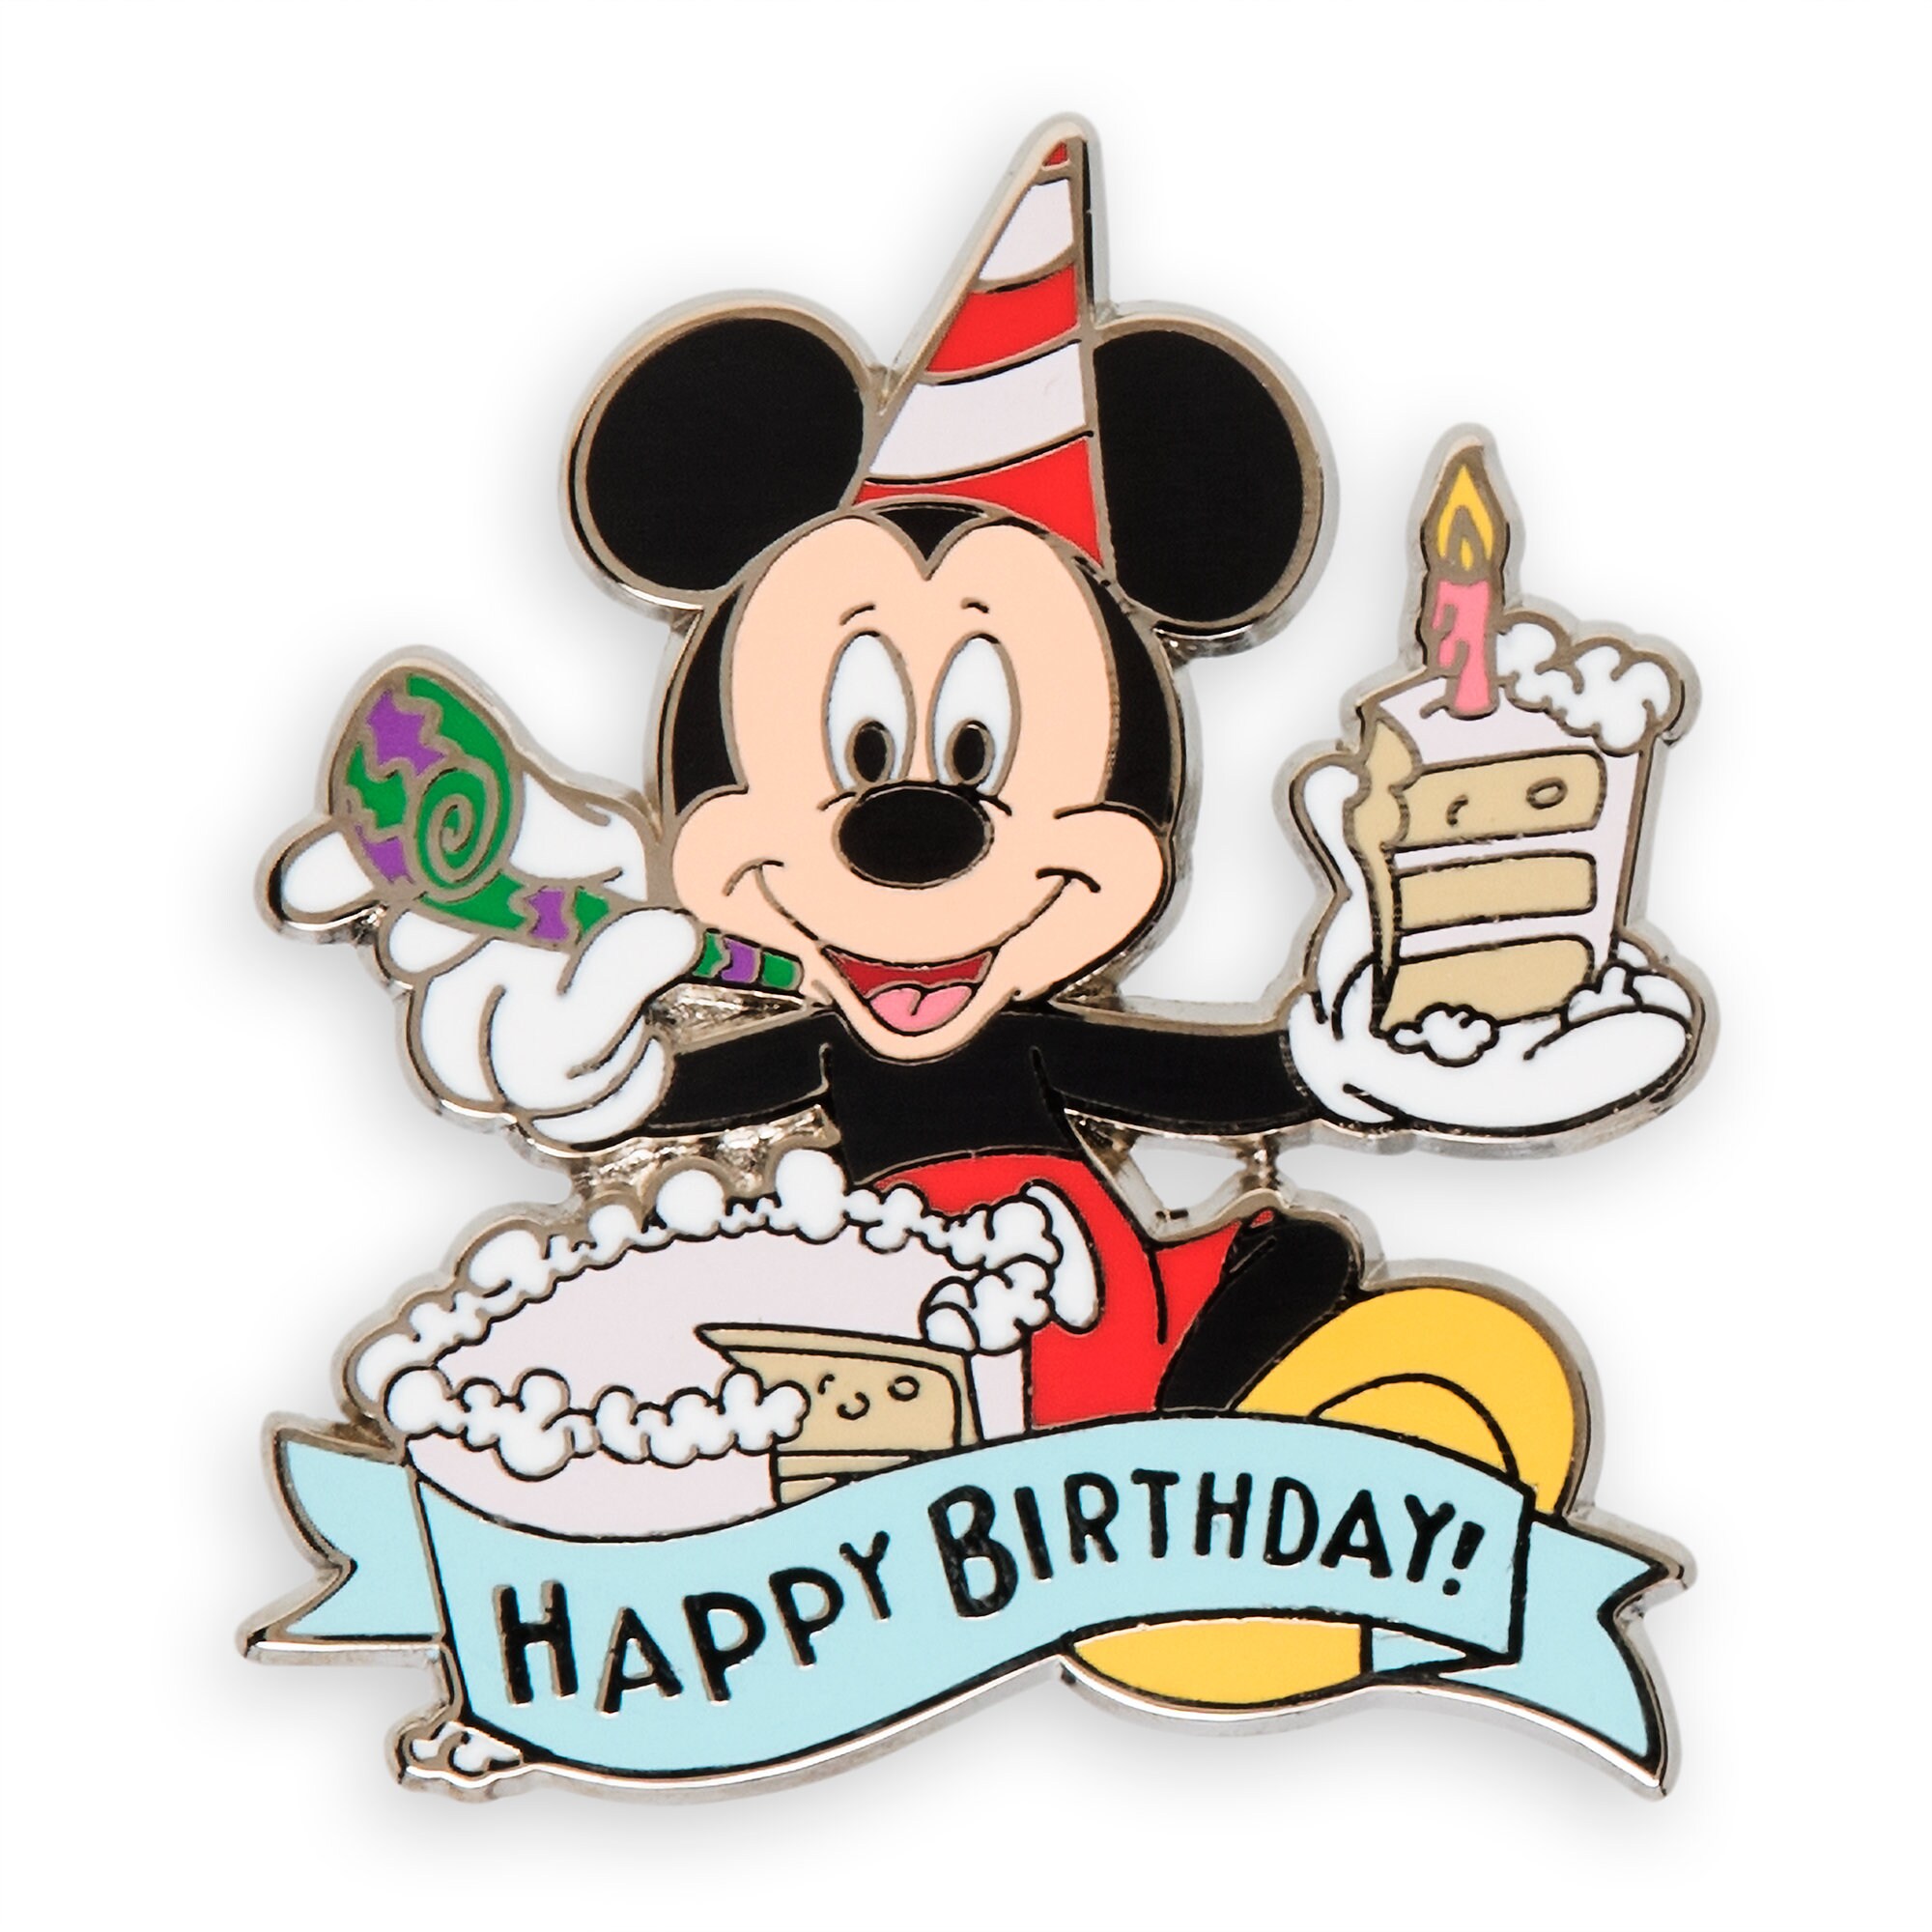 Happy Birthday Images Mickey Mouse - Printable Template Calendar